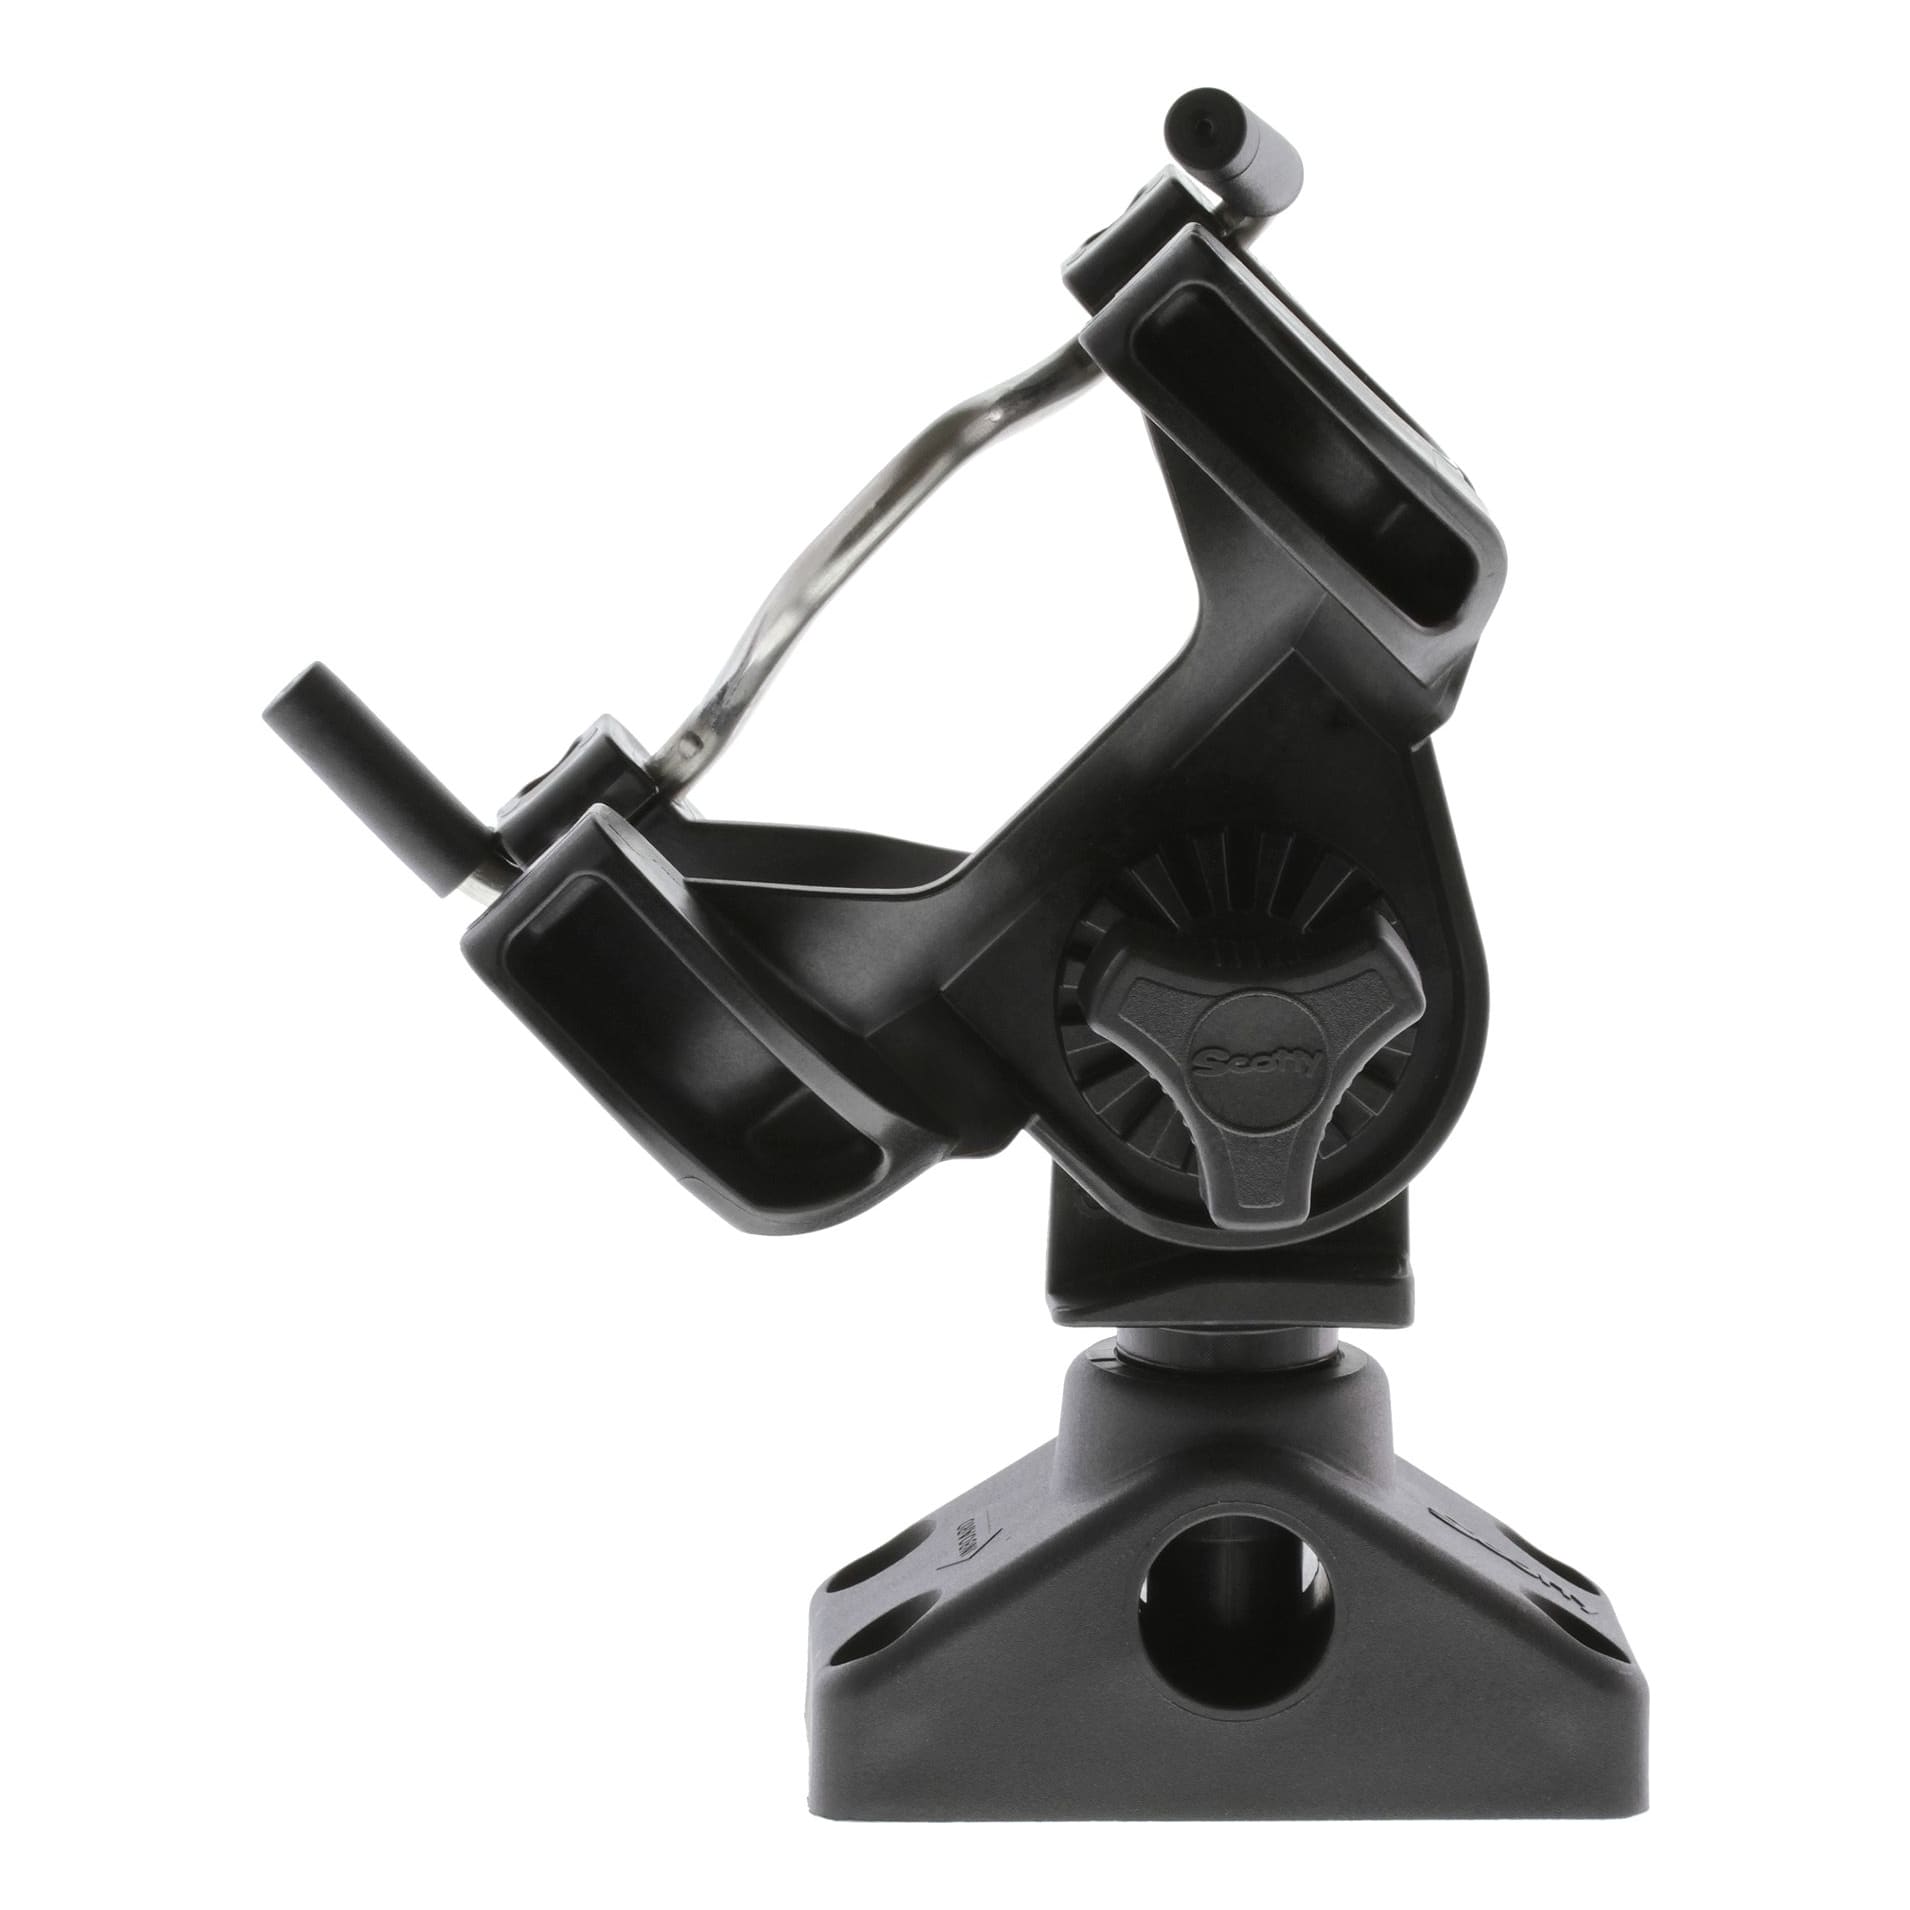 Scotty® R-5 Universal Rod Holder with Side Deck Mount